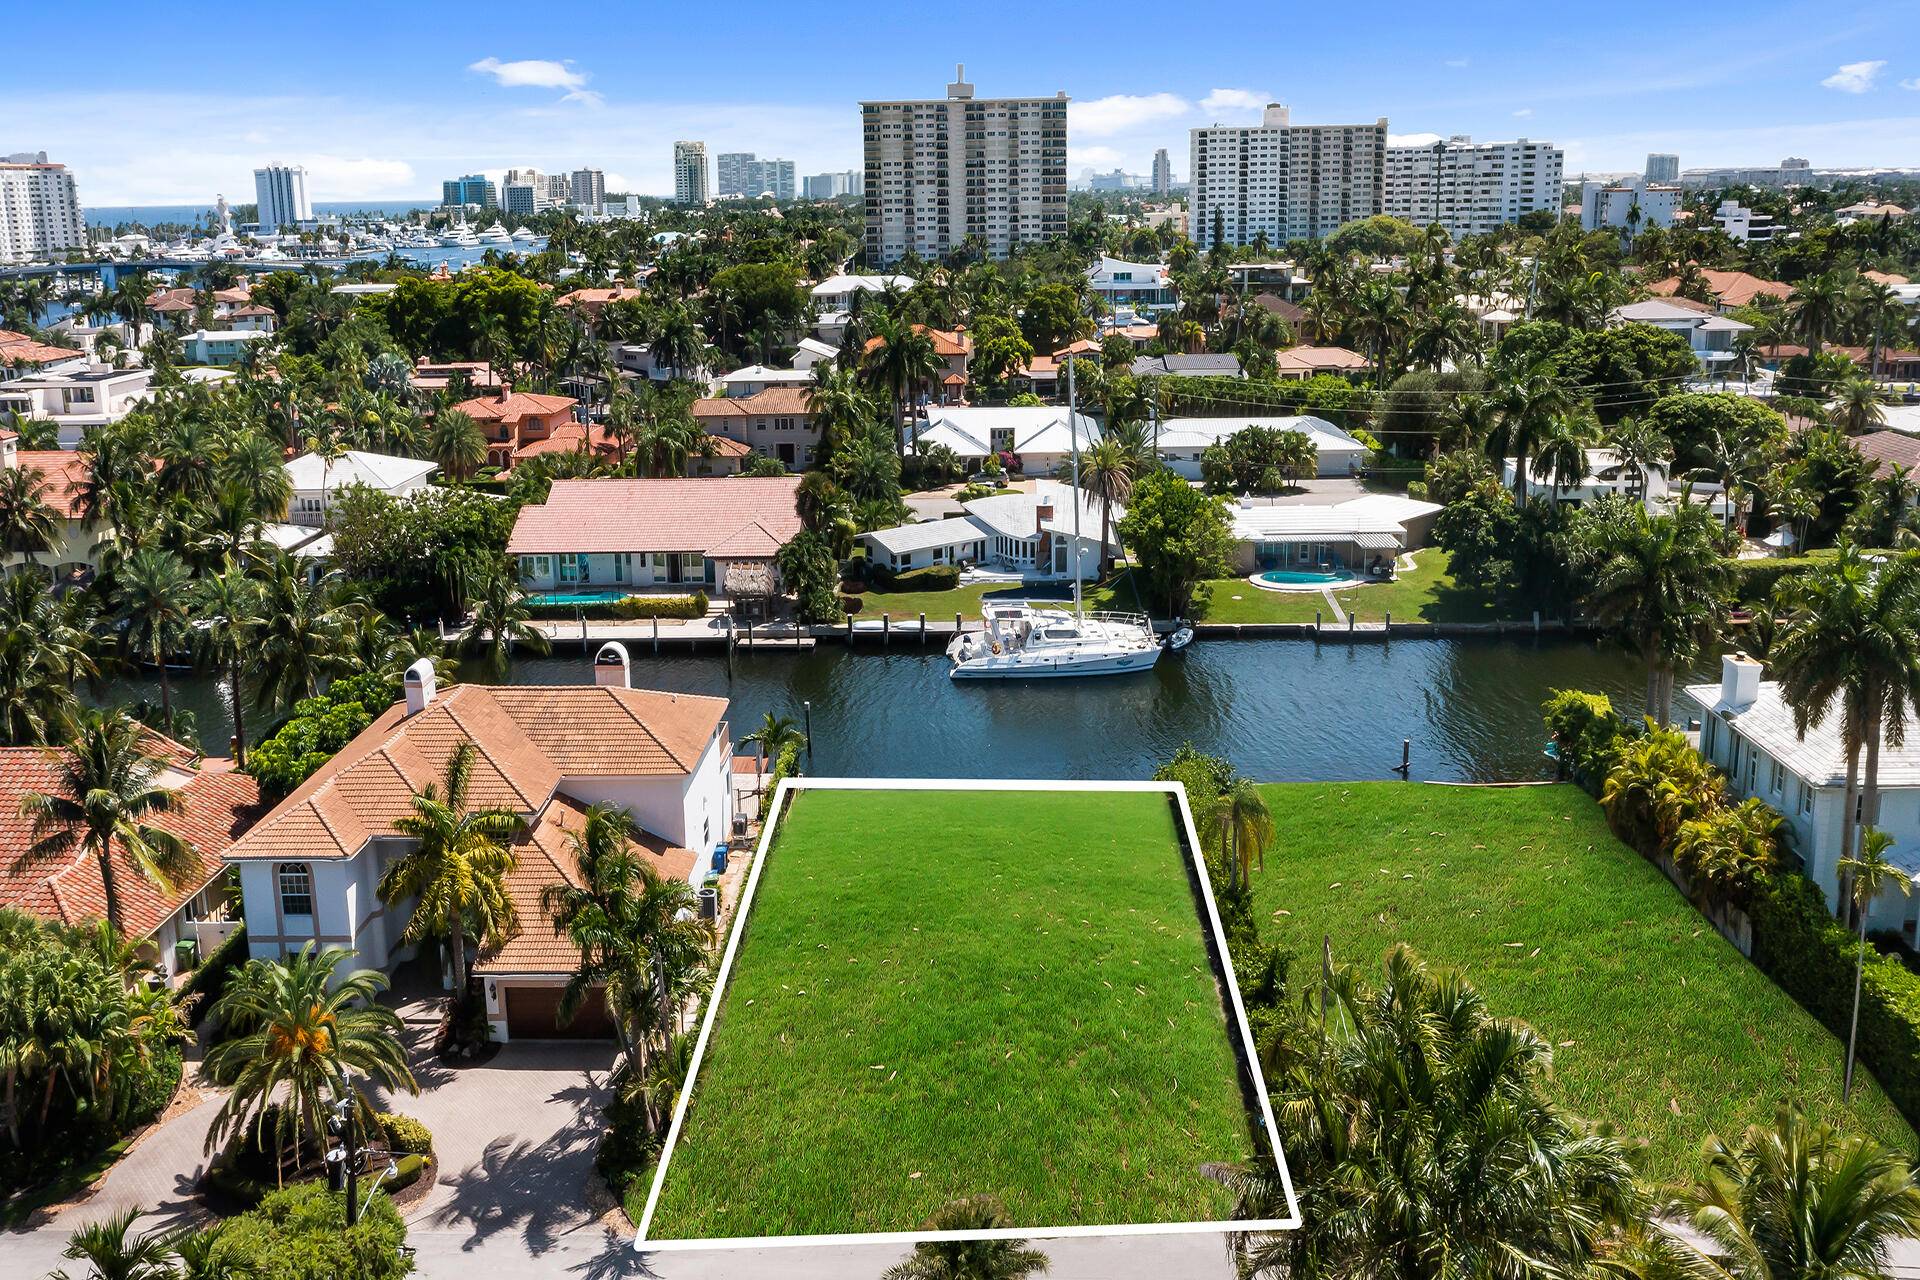 2506 Sea Island Drive is located in the high desirable community of Seven Isles which has a guarded entrance and security whom patrols the community.